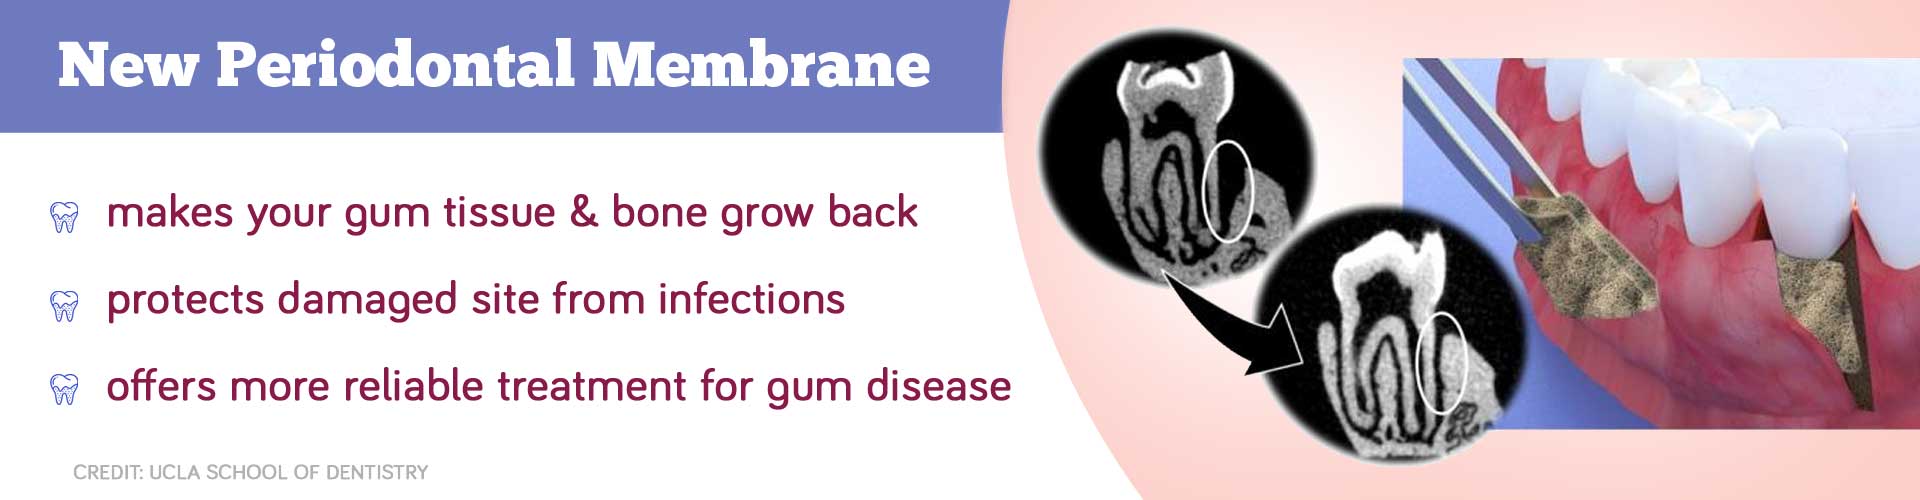 New periodontal membrane makes your gum tissue and bone grow back, protects damaged site from infections and offers more reliable treatment for gum disease.